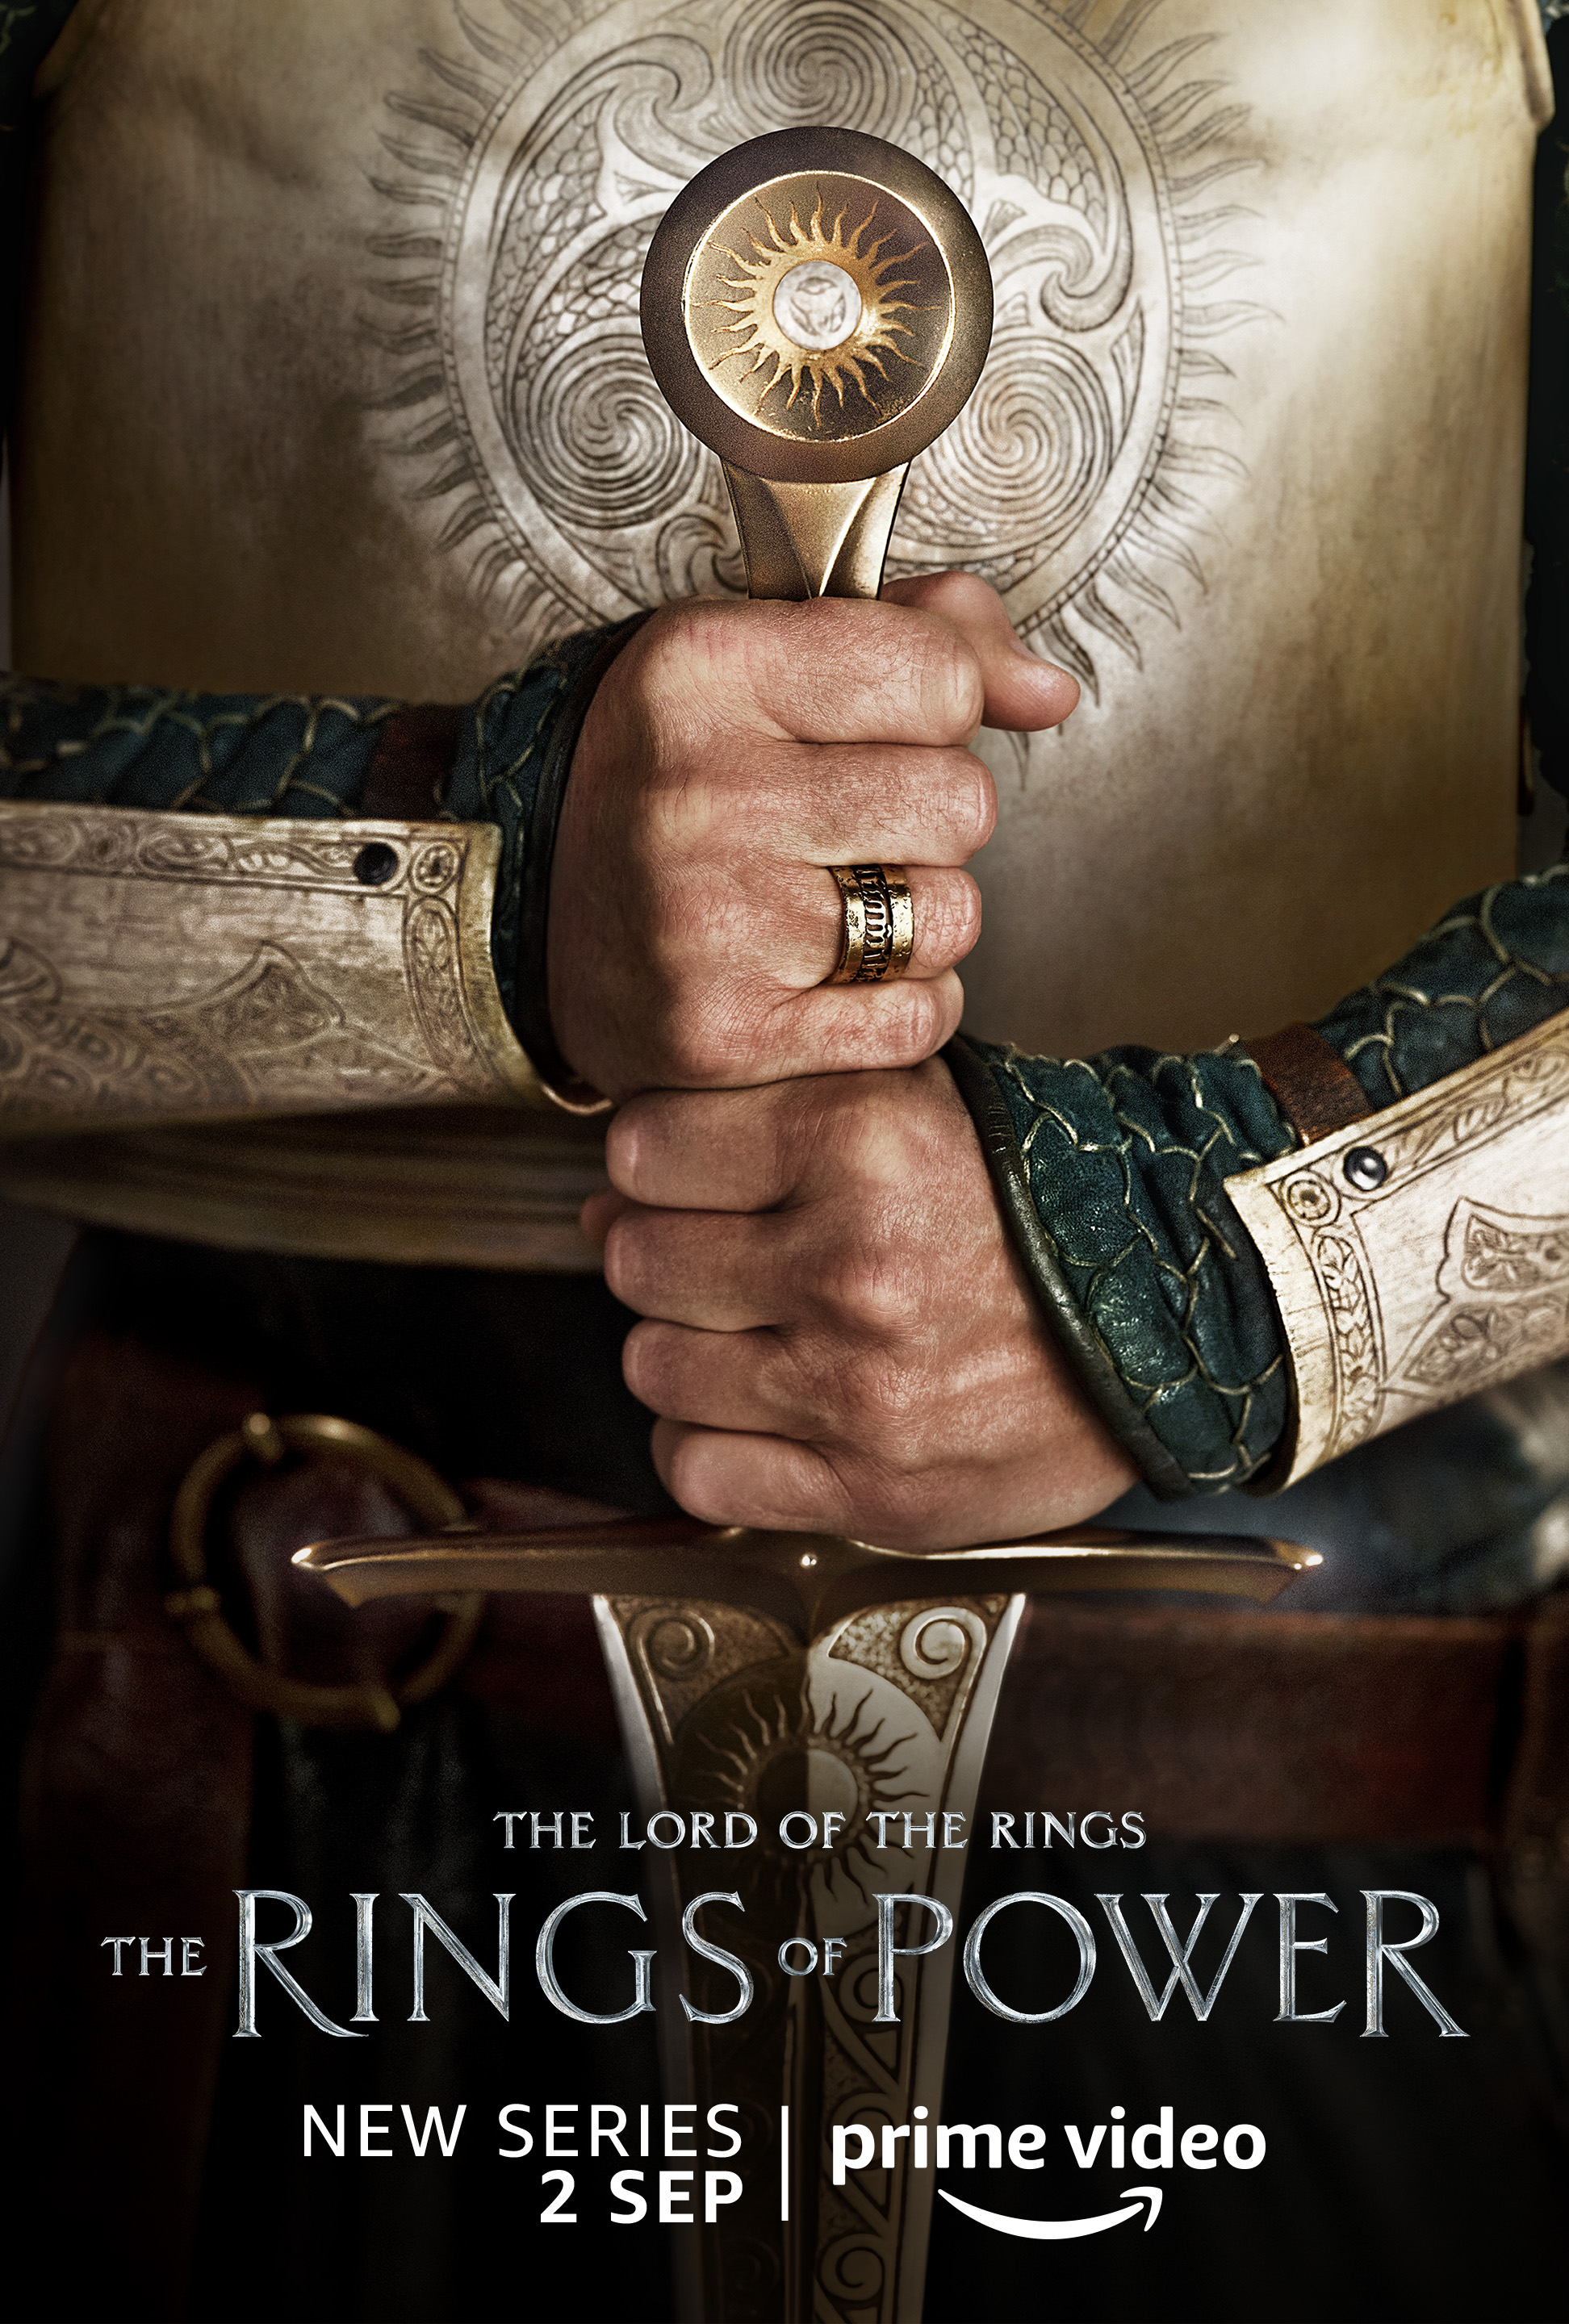 Another human knight character poster for Lord of the Rings: The Rings of Power